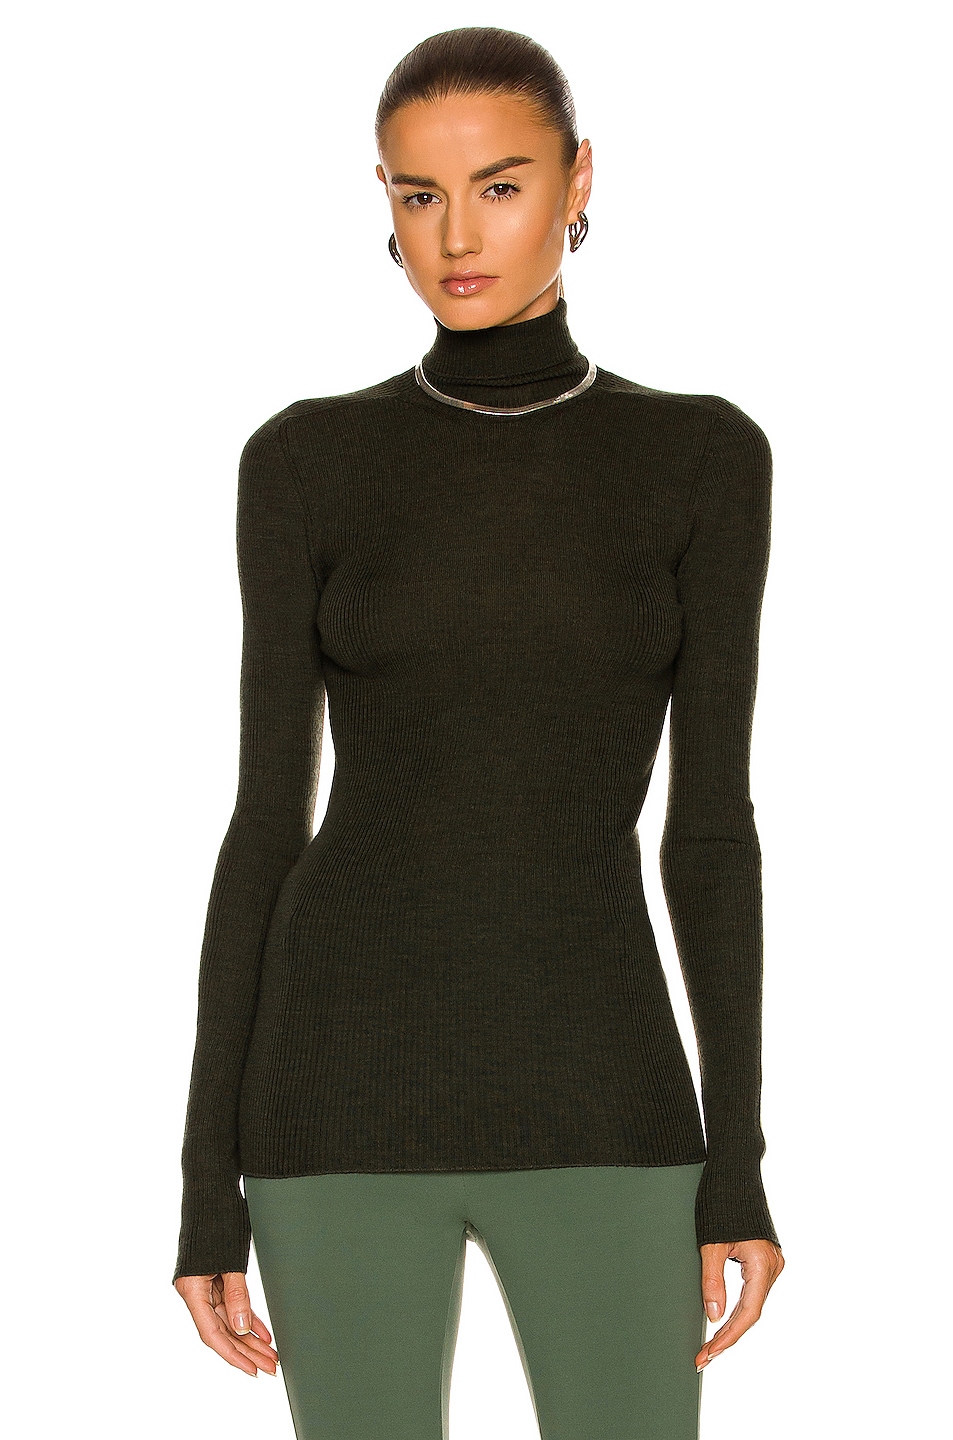 Turtleneck in Army